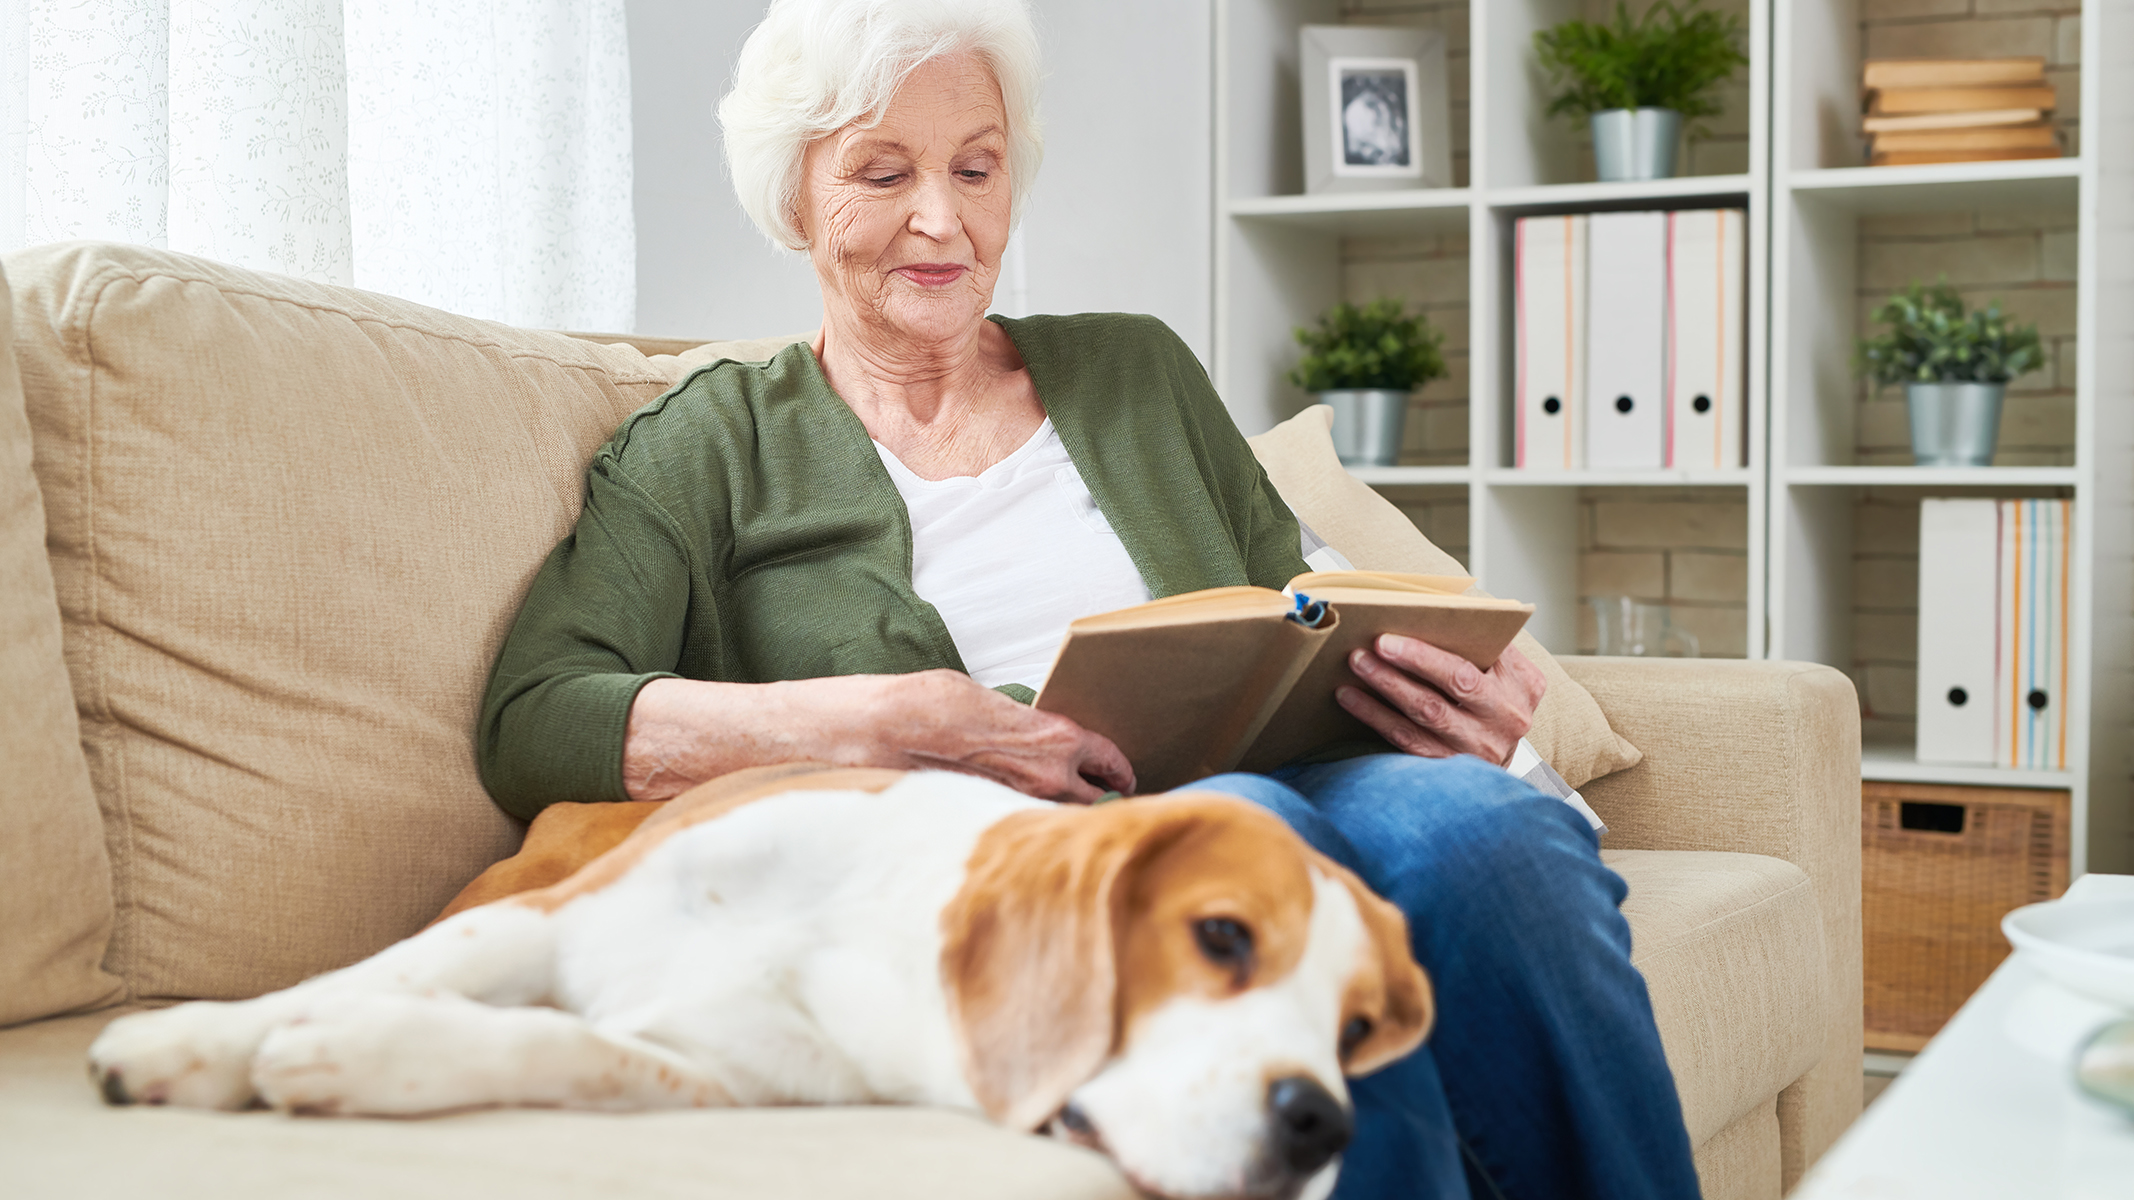 Senior woman reading a book on the couch with a dog.